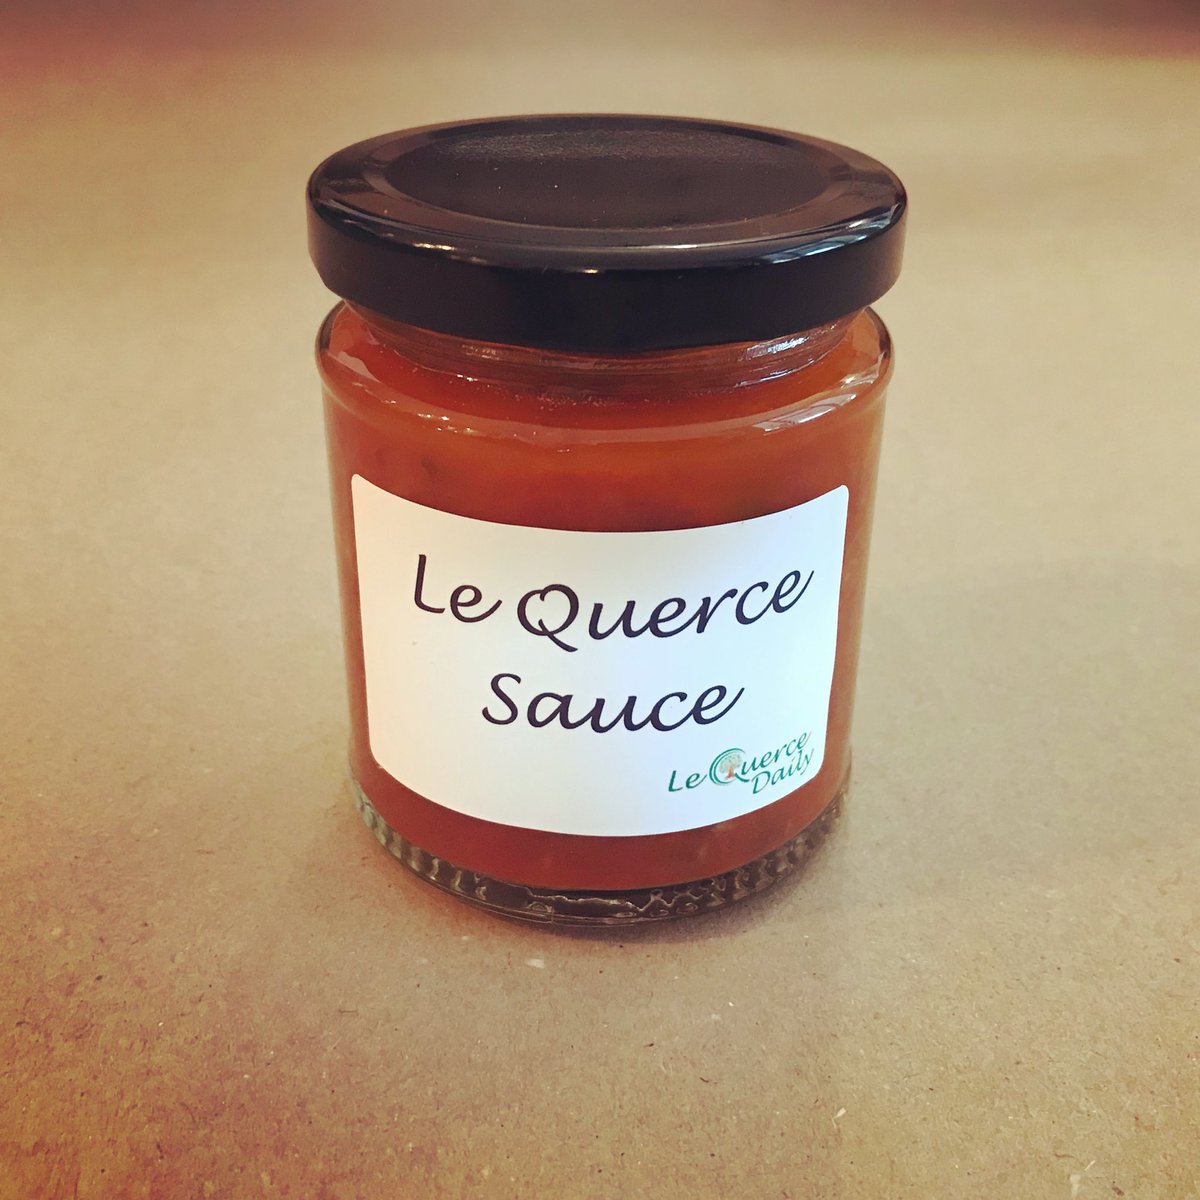 This week, you can’t miss: Le Querce #sauce 🧐❓
#southeastlondon #se #greenwich #deptford #newcross #stockwell #lewisham #bromley #brockley #se23 #brockleyrise #honoroak #foresthill #croftonpark #brockley #catford #ladywell #blythehill #perryvale #peckham #dulwich #sydenham